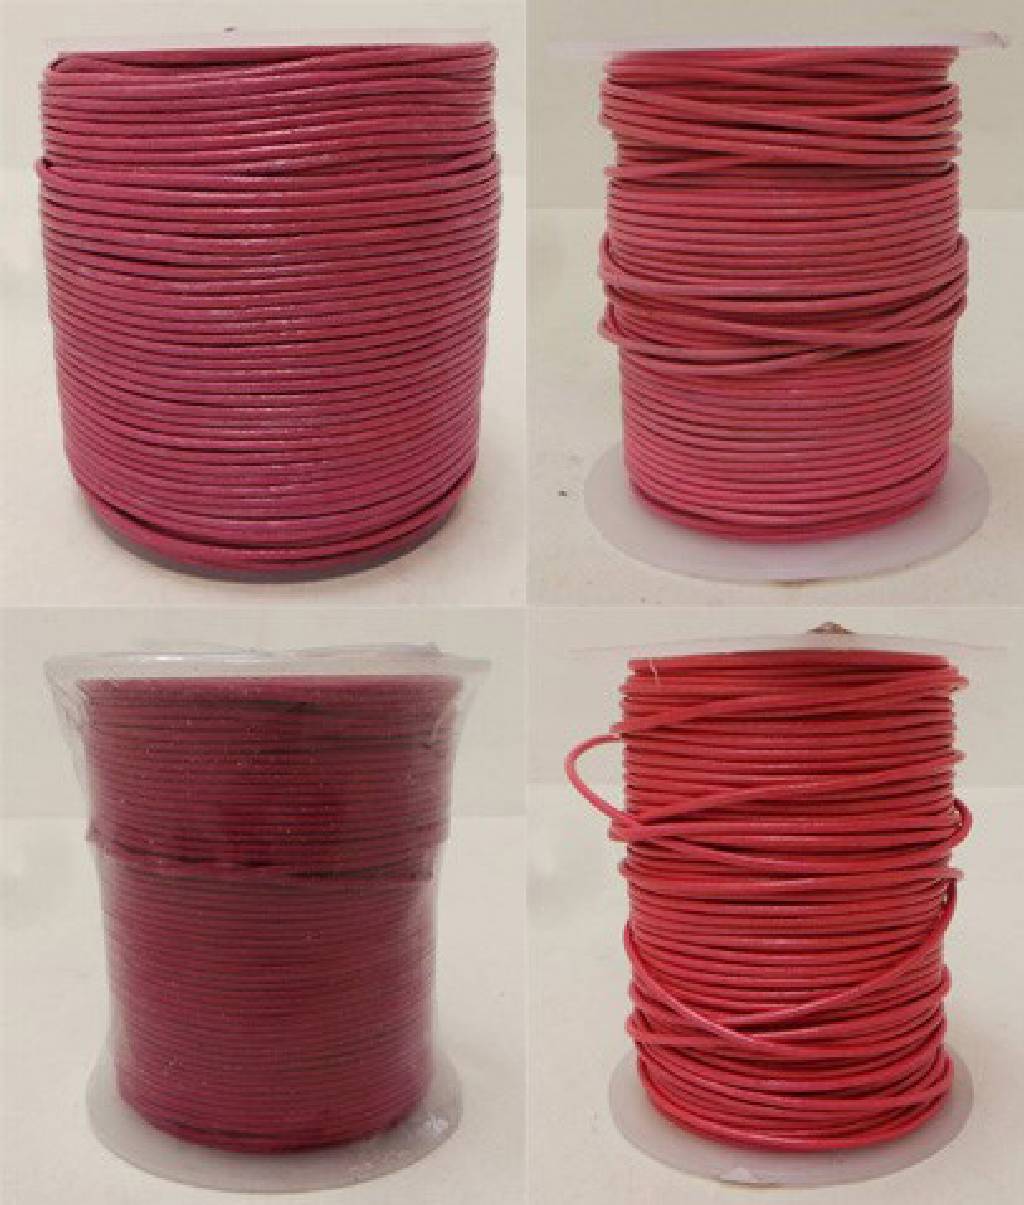 One Off Joblot of Approx 655m of Pink Real Leather Round Cords 4 Shades 1mm Wide